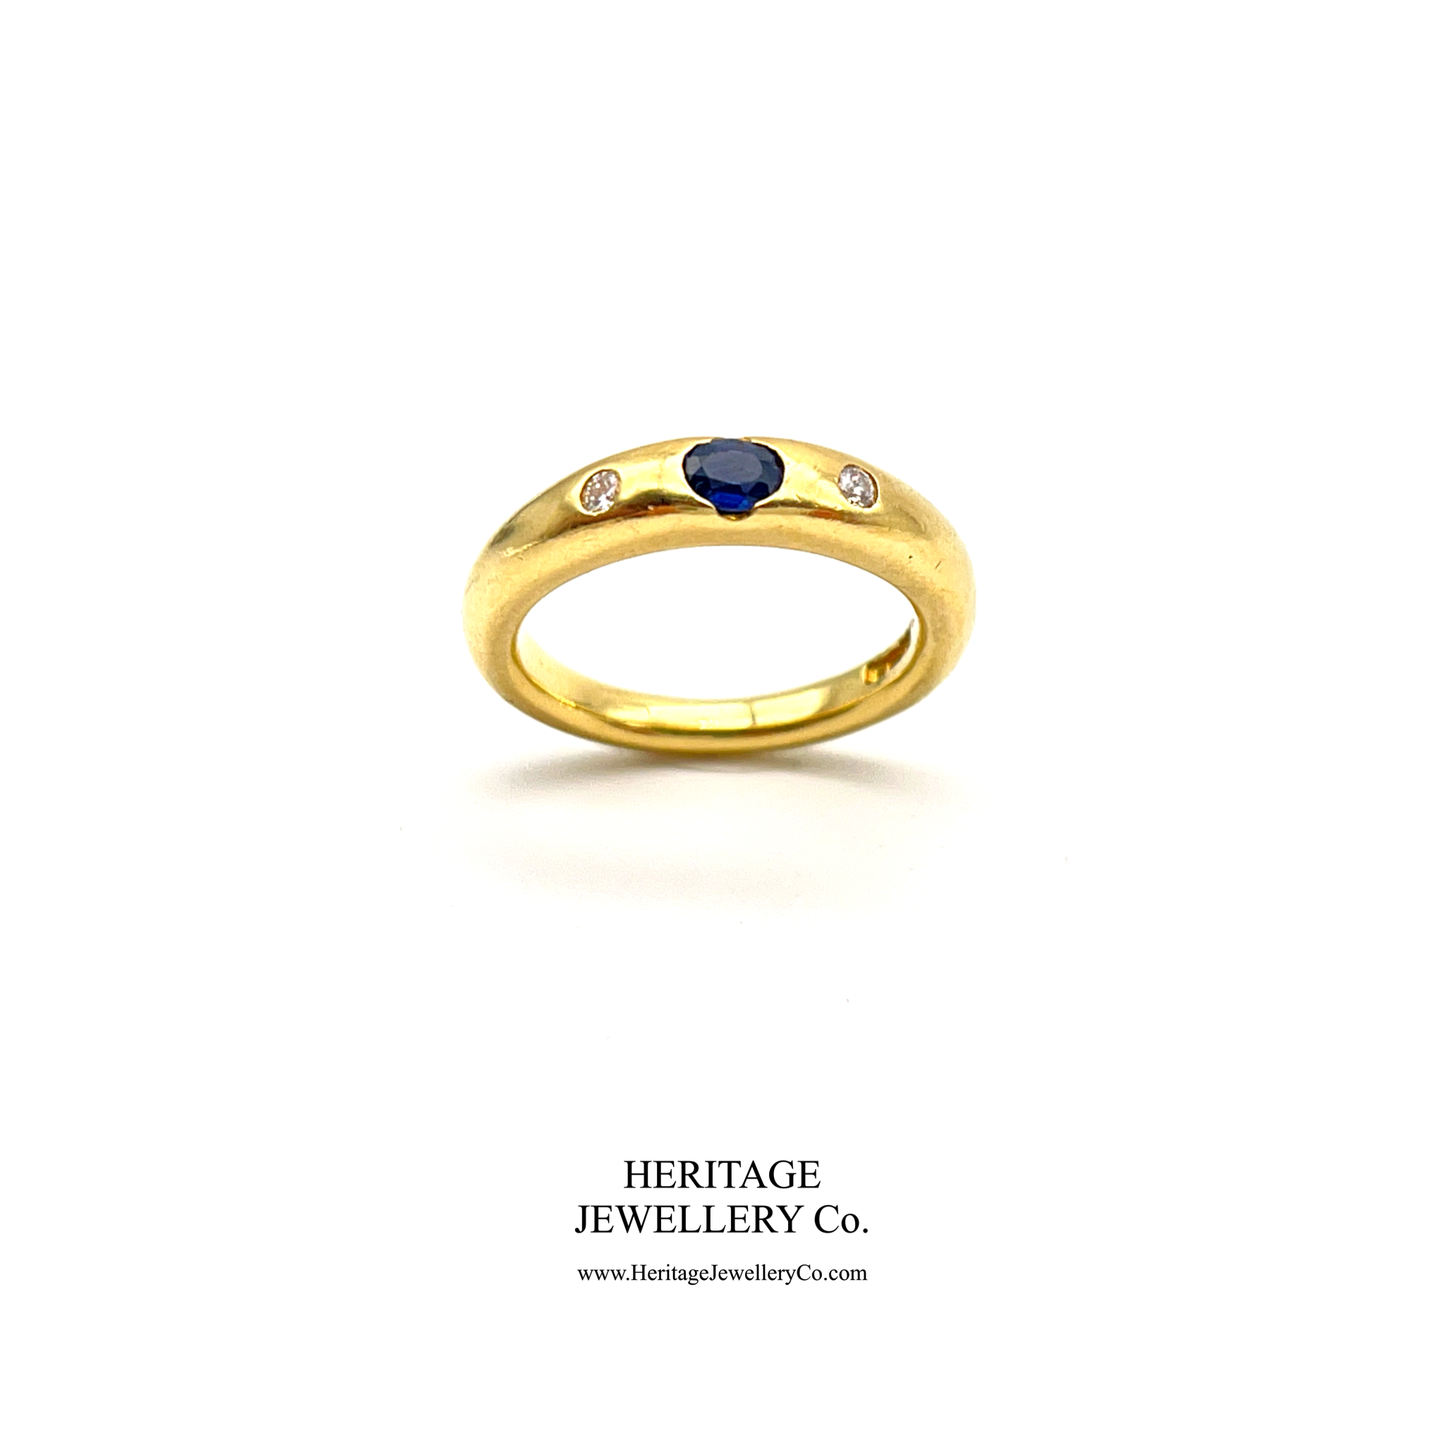 Vintage Sapphire and Diamond Gypsy Ring by Tiffany